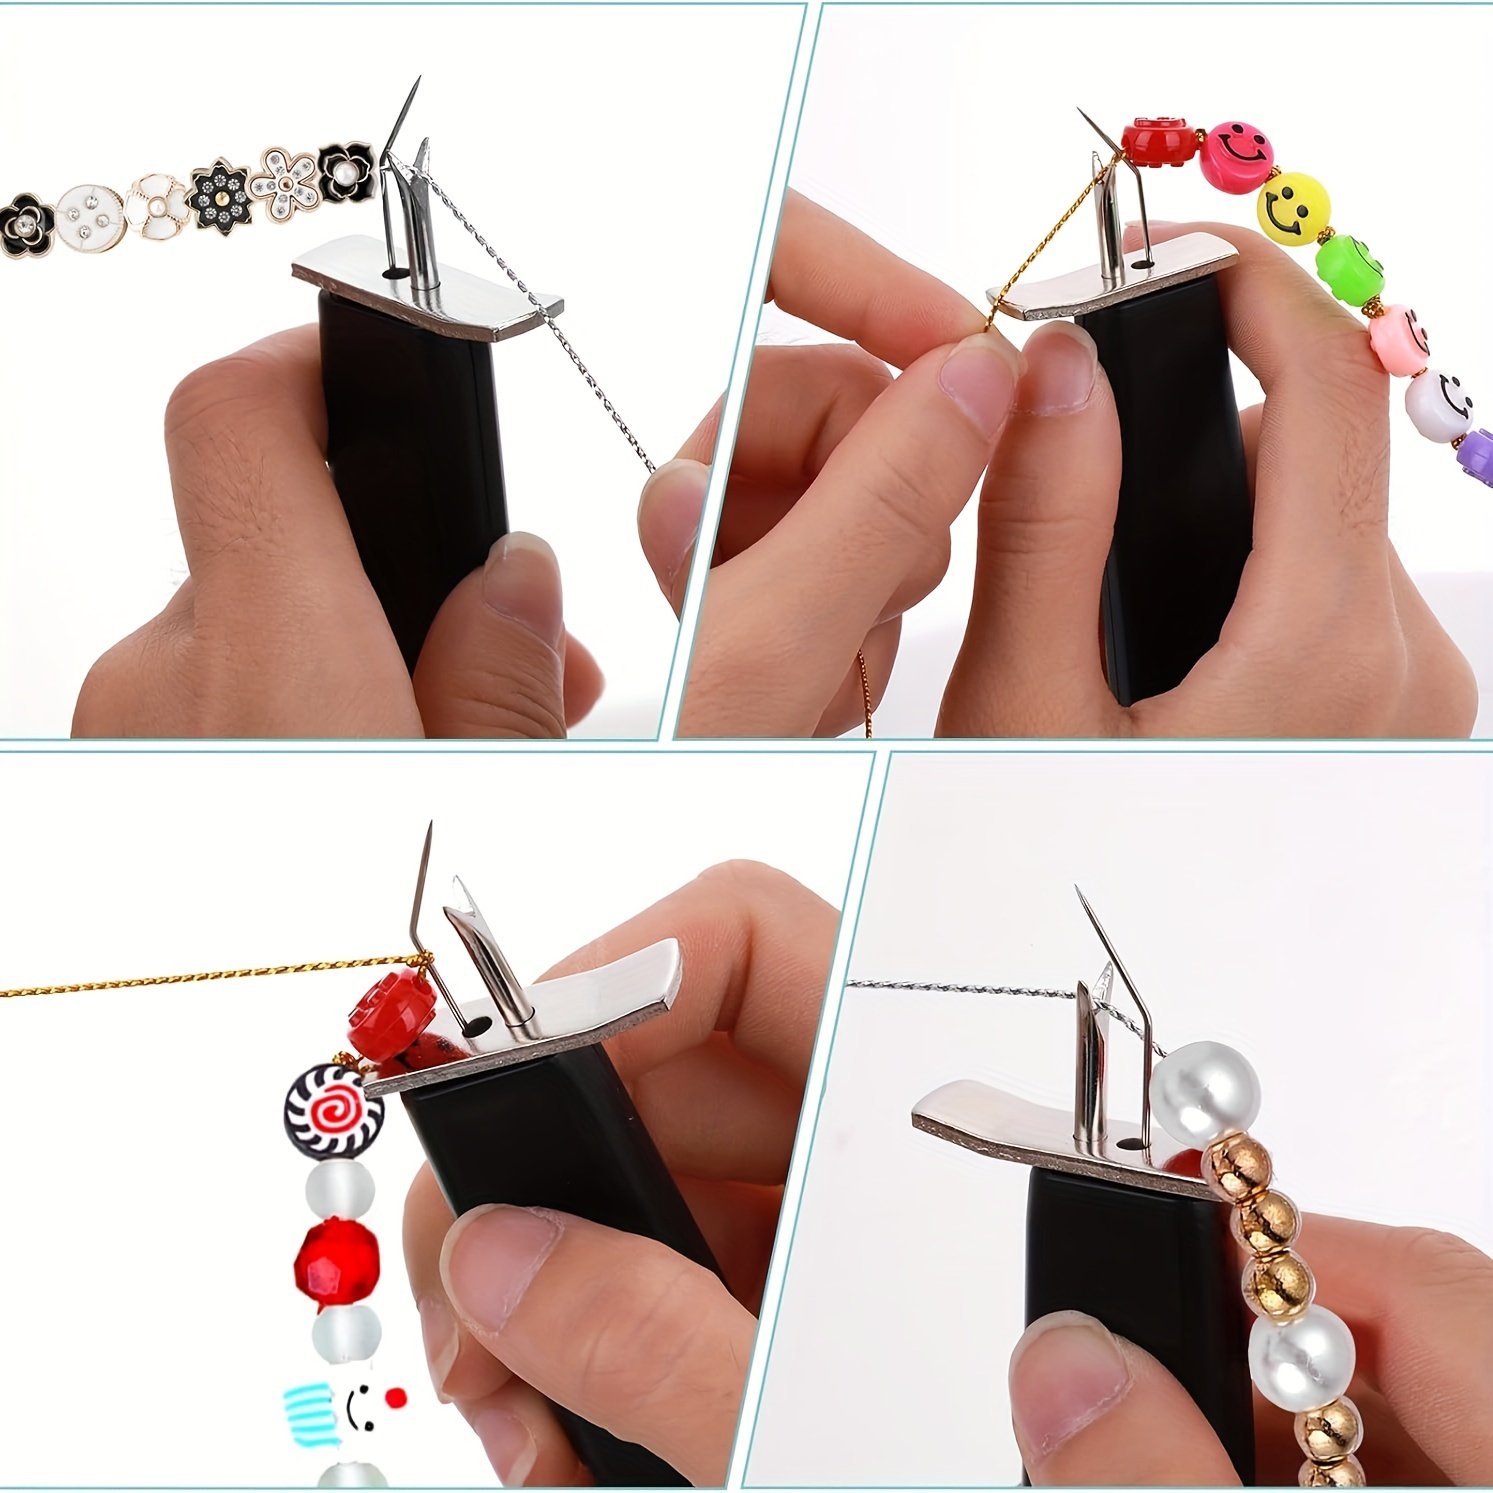 Easy Knotter Knot-Tying Tool for Beads and Pearls